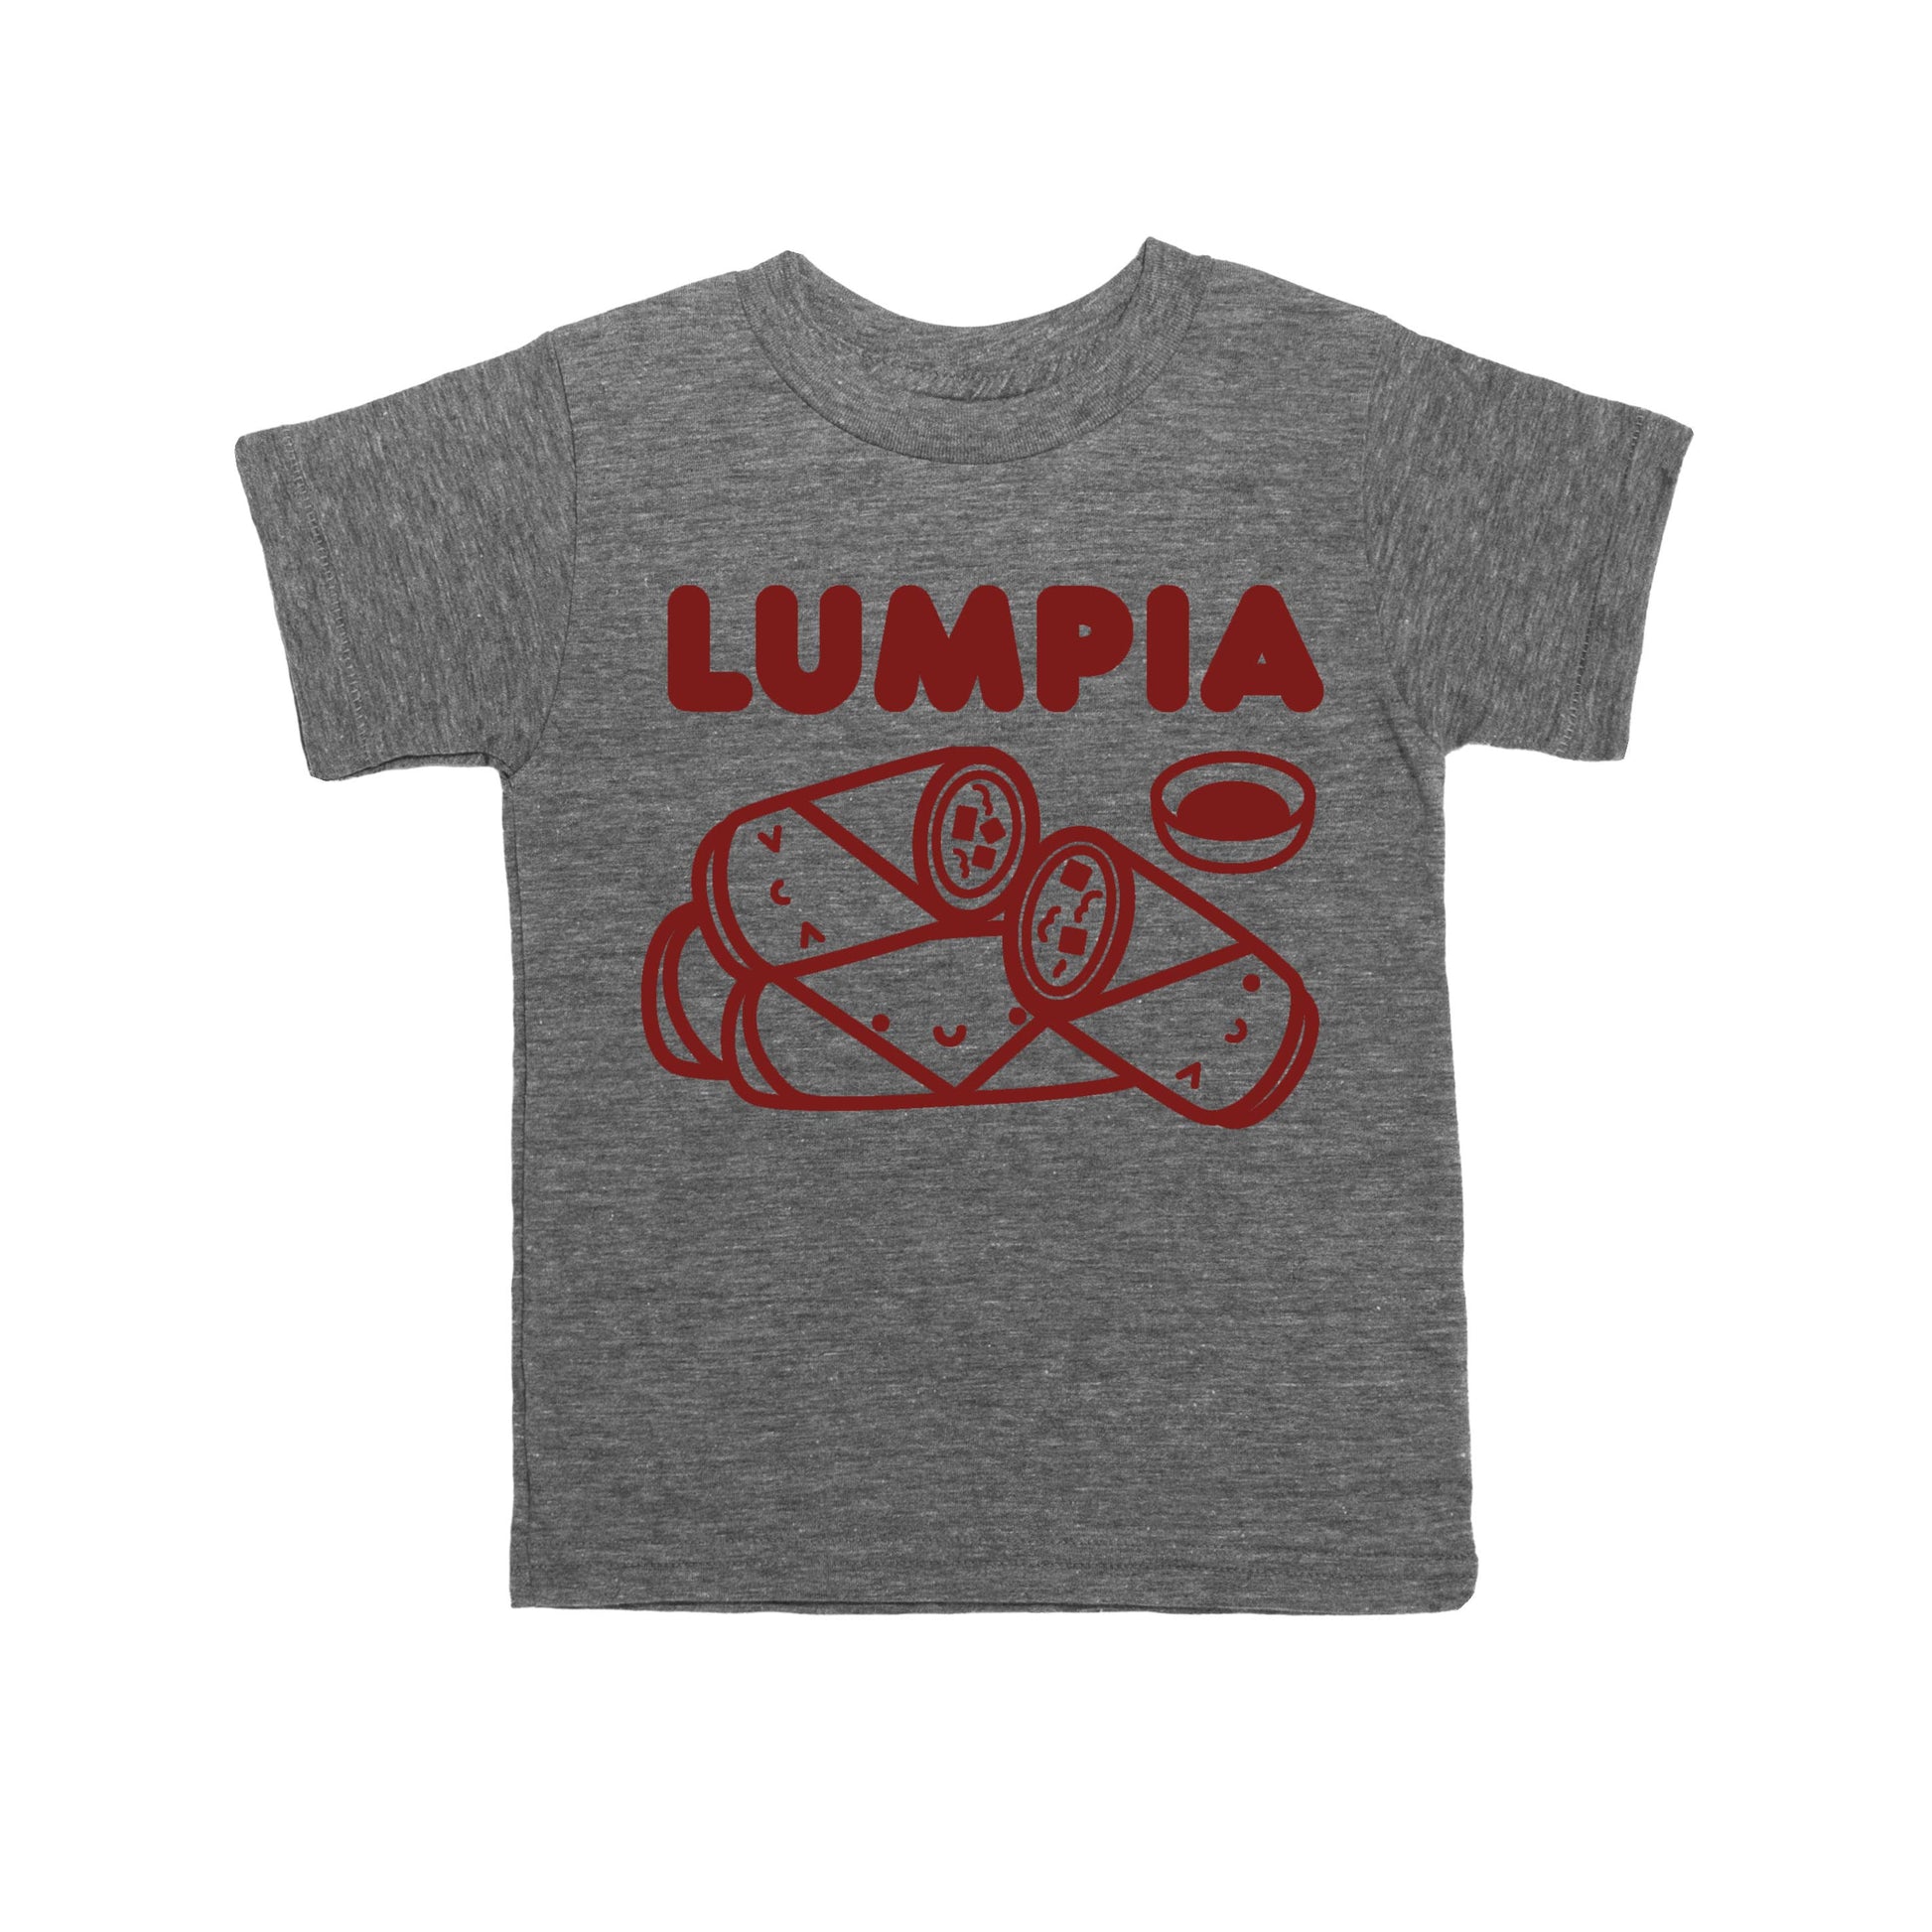 Dark gray toddler/kids size tee with an illustration of cut up lumpia and sauce, printed in red ink, and text that reads "Lumpia" 